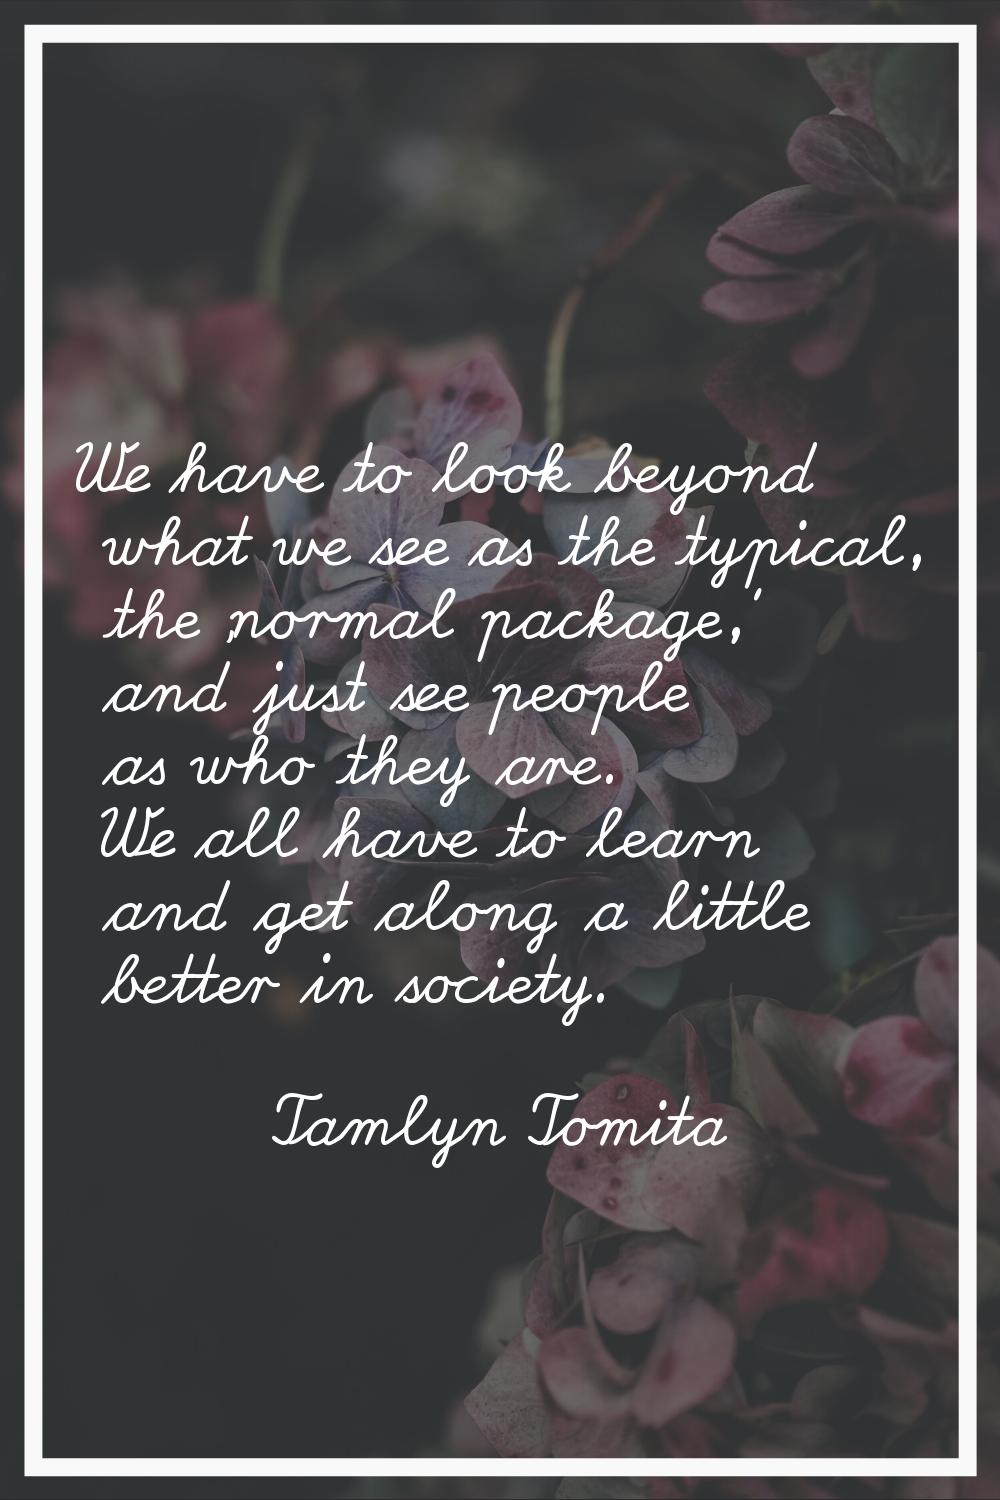 We have to look beyond what we see as the typical, the 'normal package,' and just see people as who